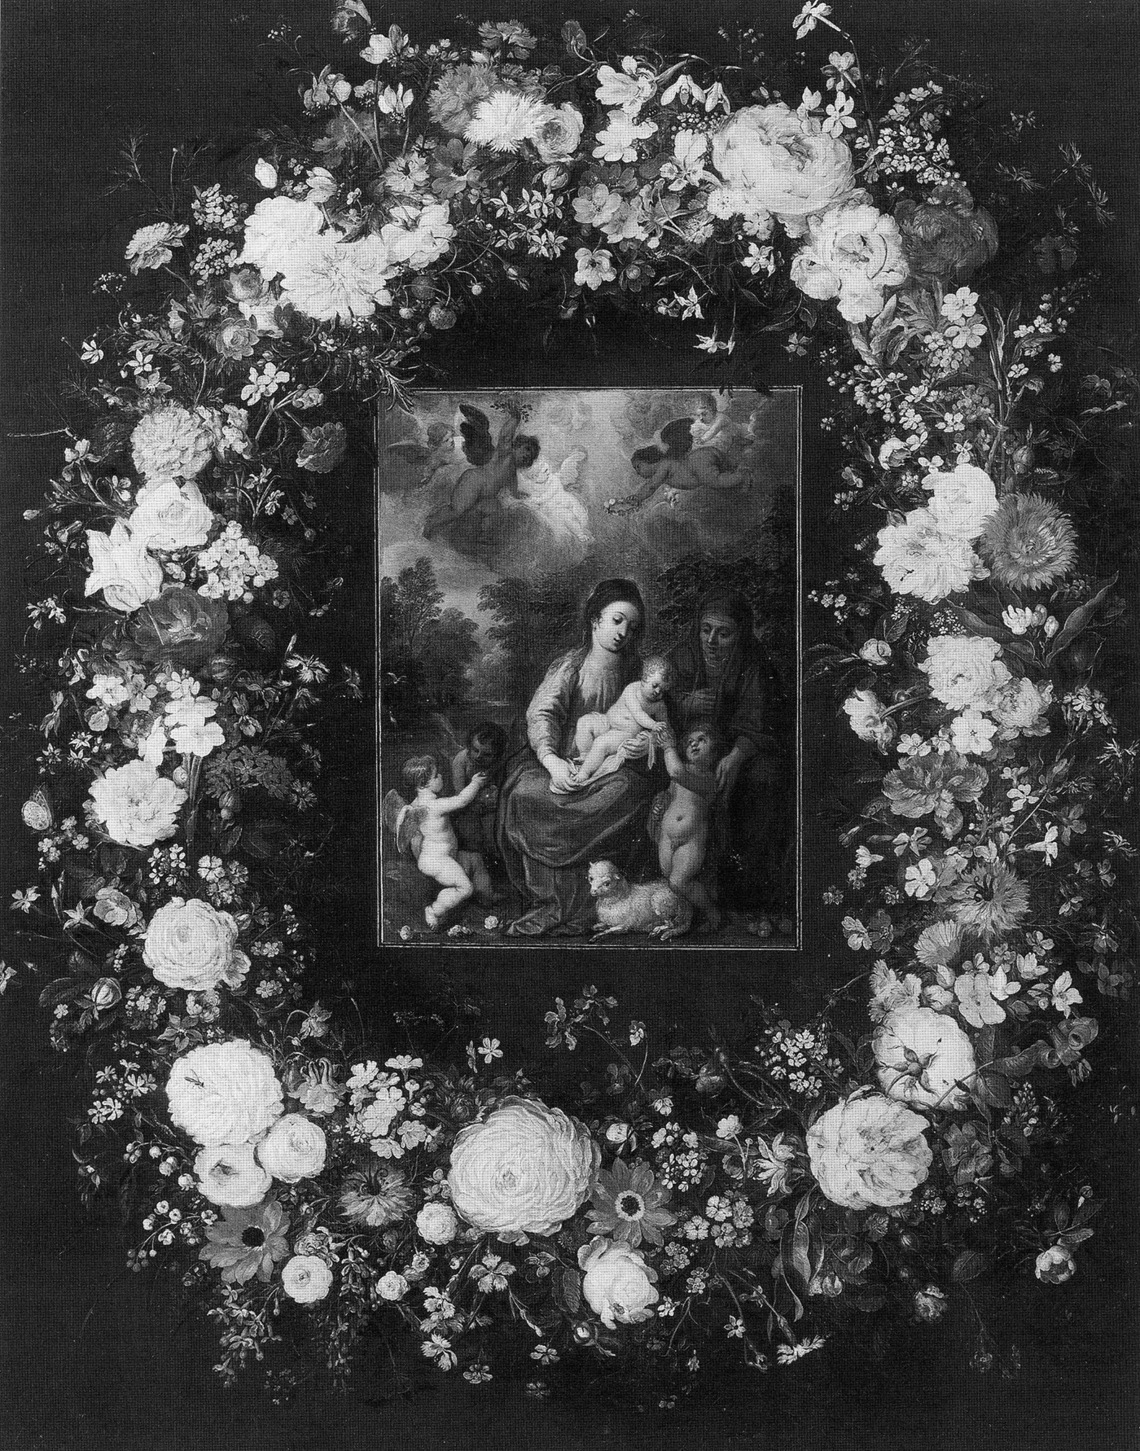 Flower Garland with Holy Family and St. Elizabeth and John